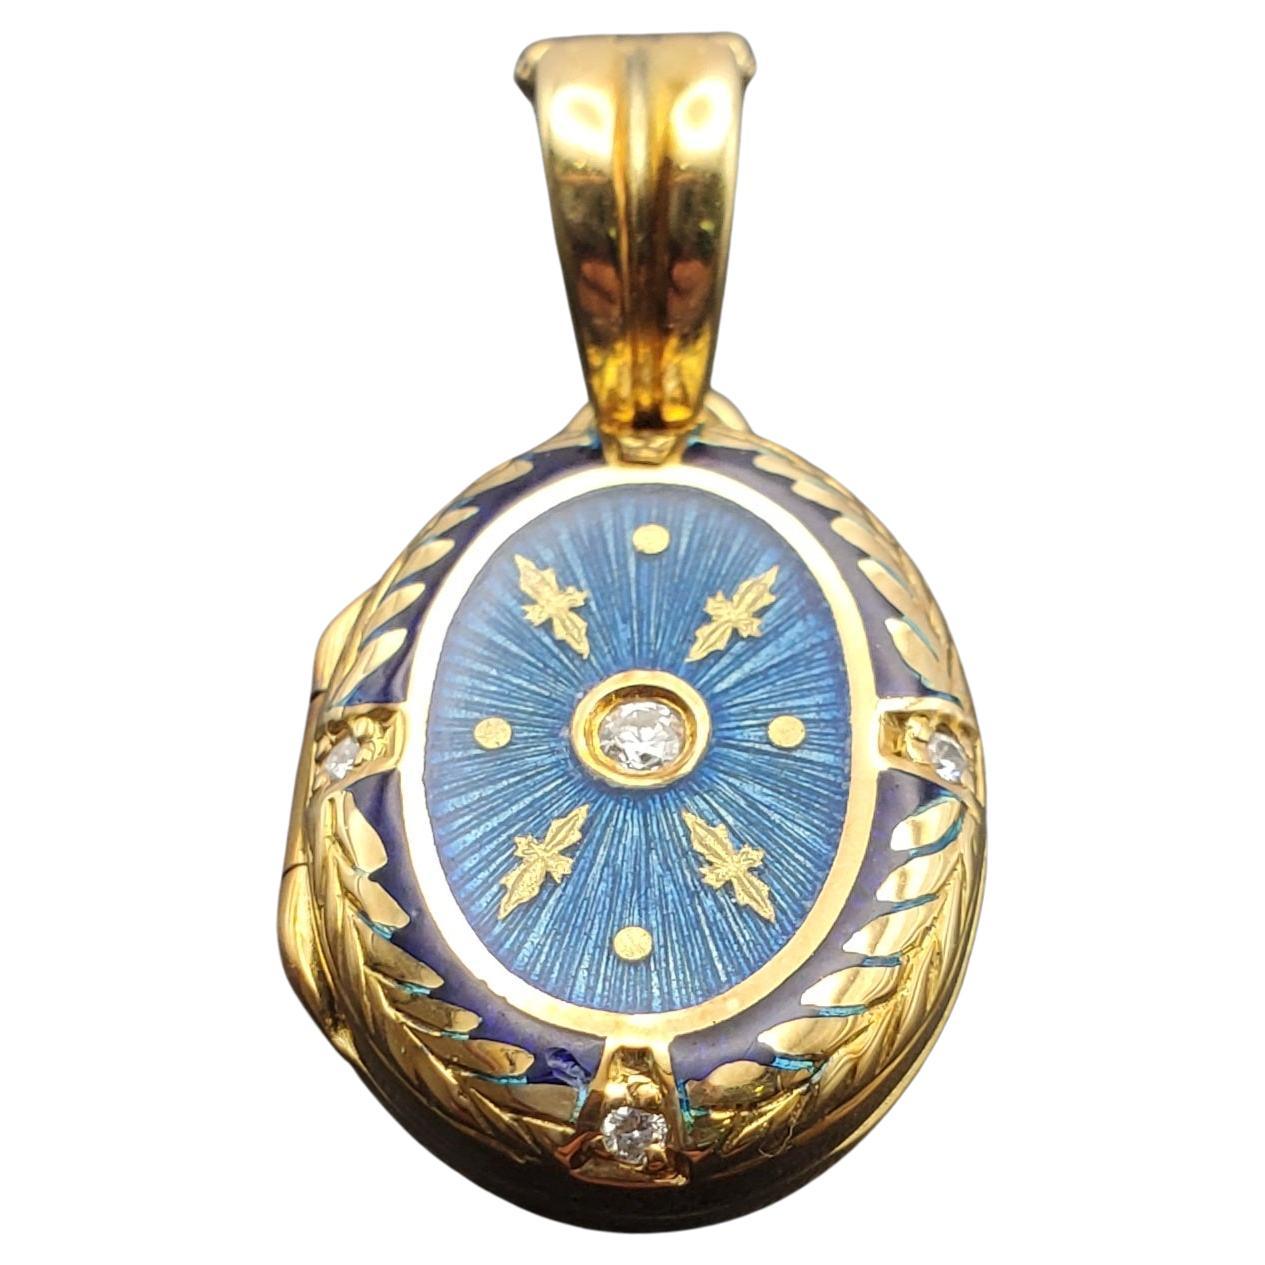 Gorgeous handmade 18k gold, diamond, and guilloche enamel locket. This limited edition piece was designed by Victor Mayer for Fabergé. The design features vibrant blue transparent enamel that has been applied over the top of an intricate starburst